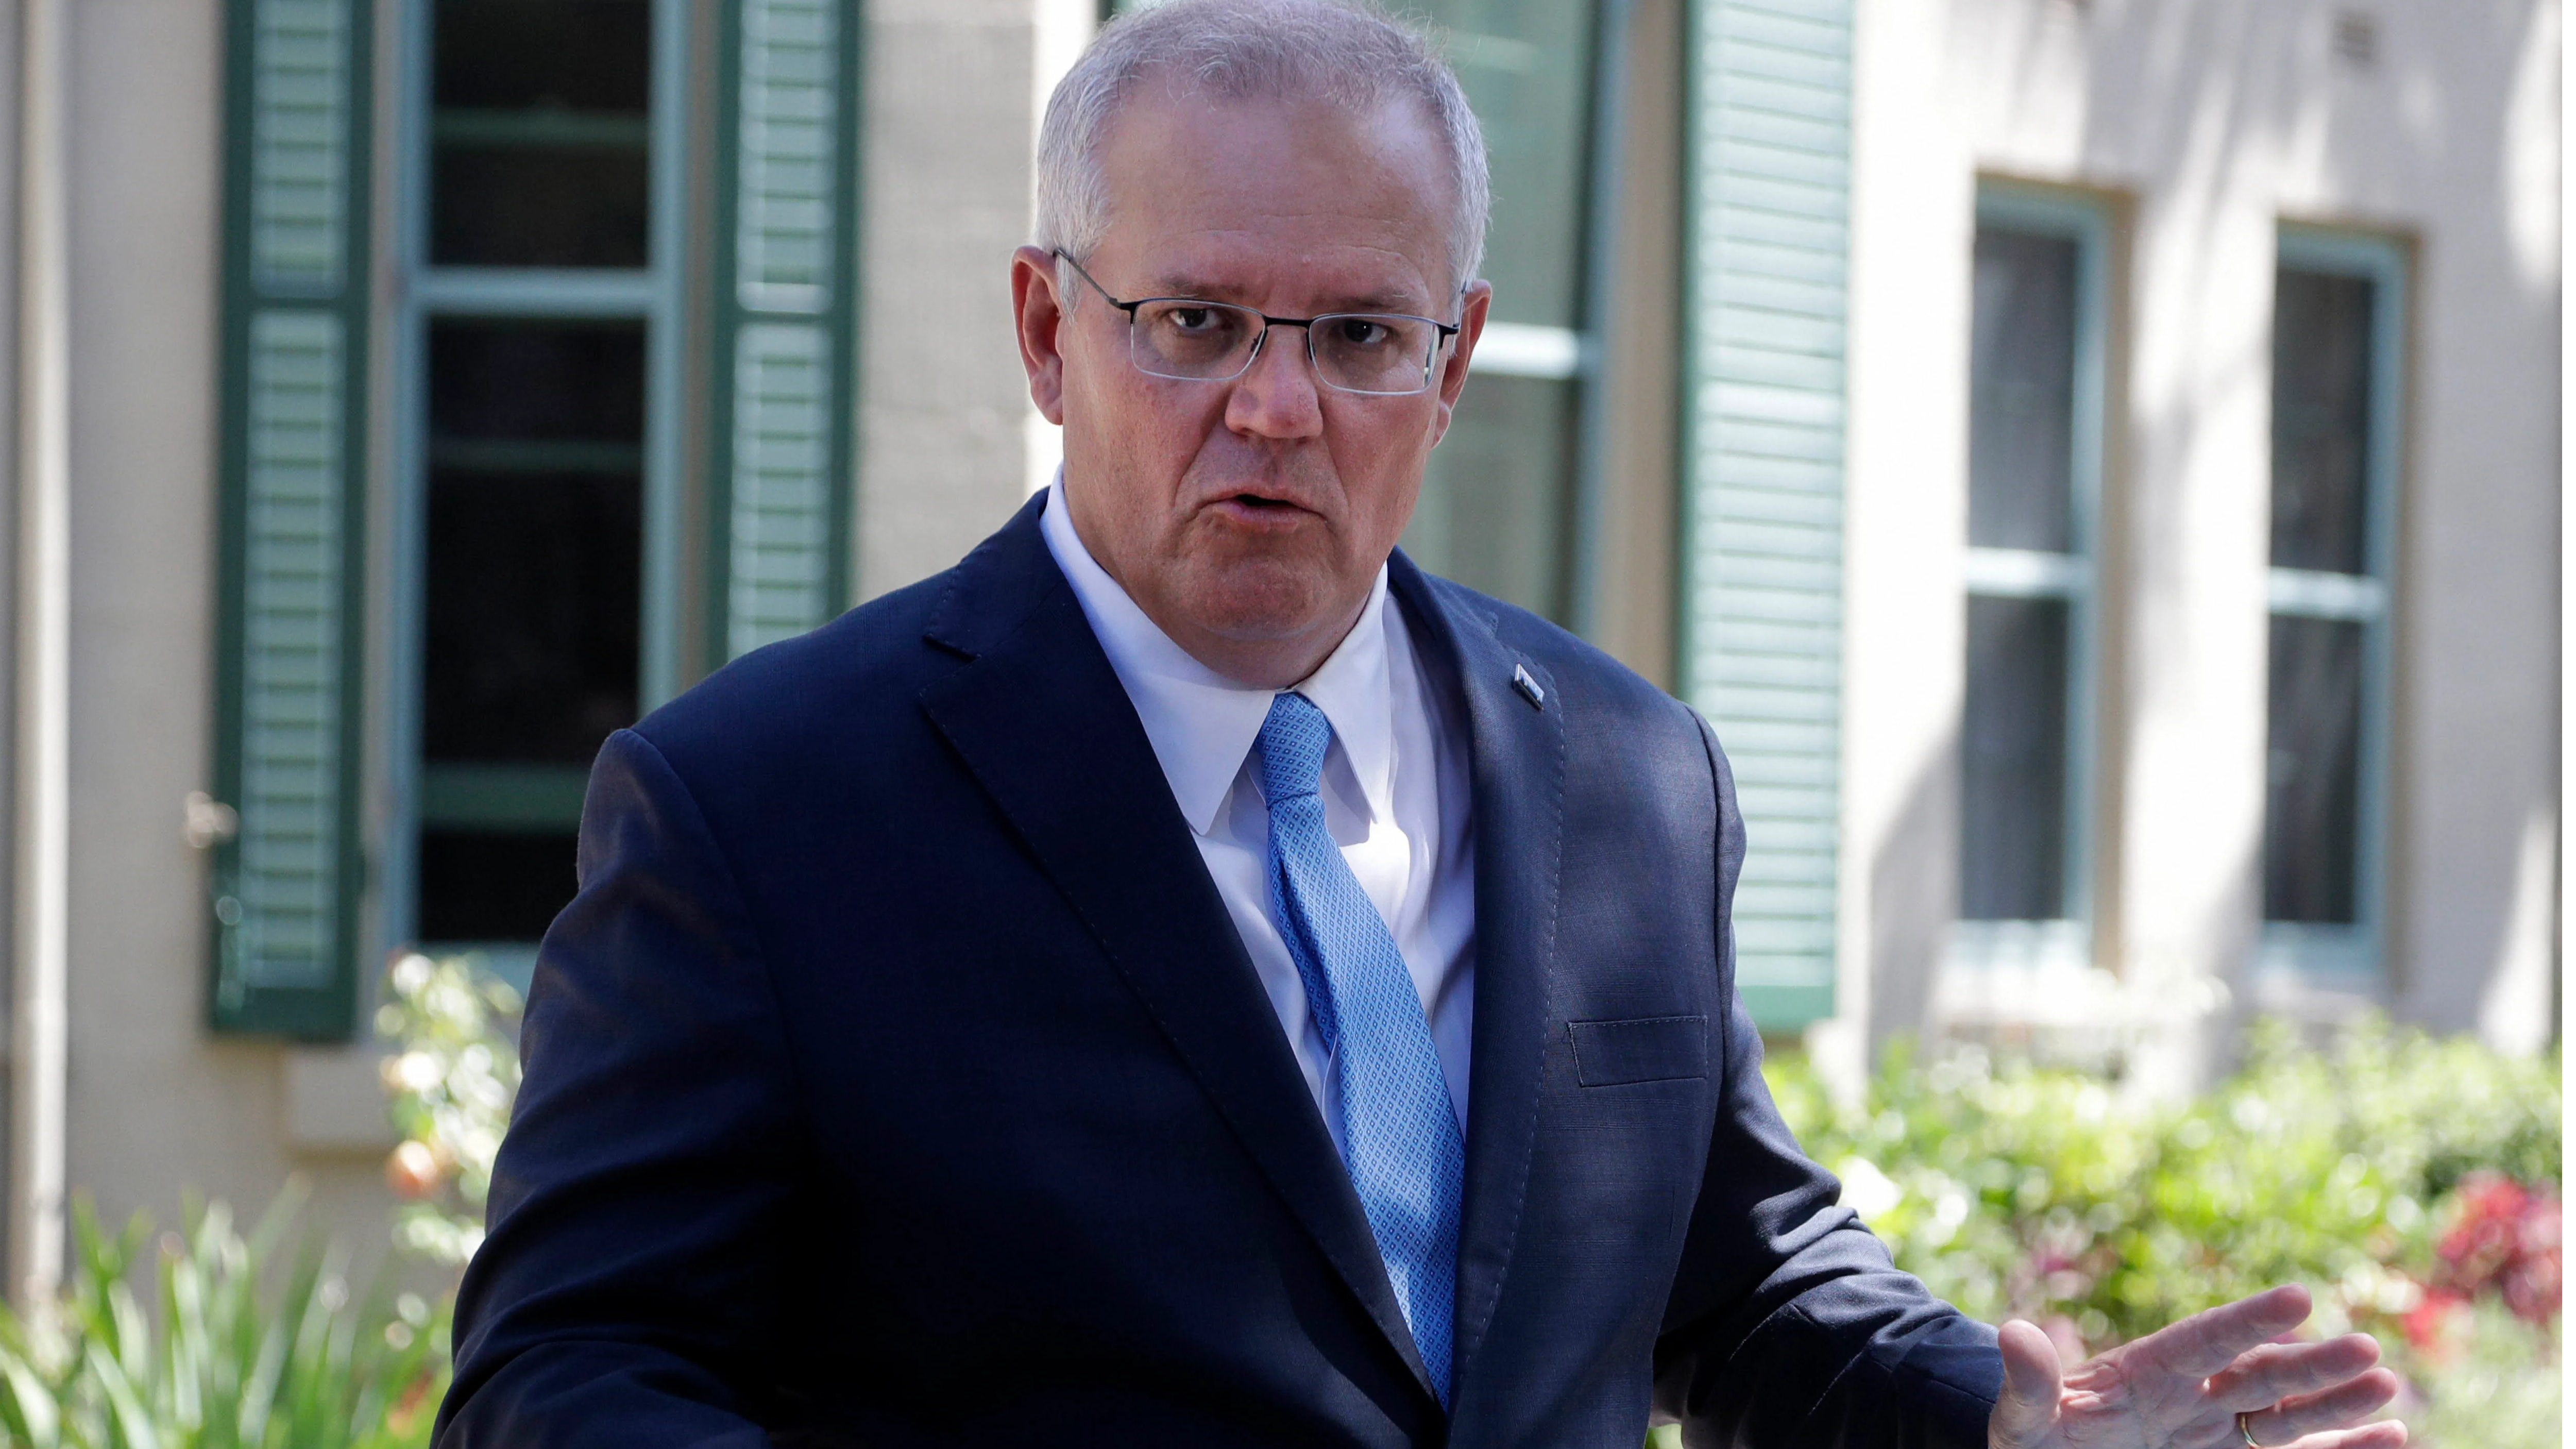 Two Australian cabinet ministers demoted after dual rape scandals